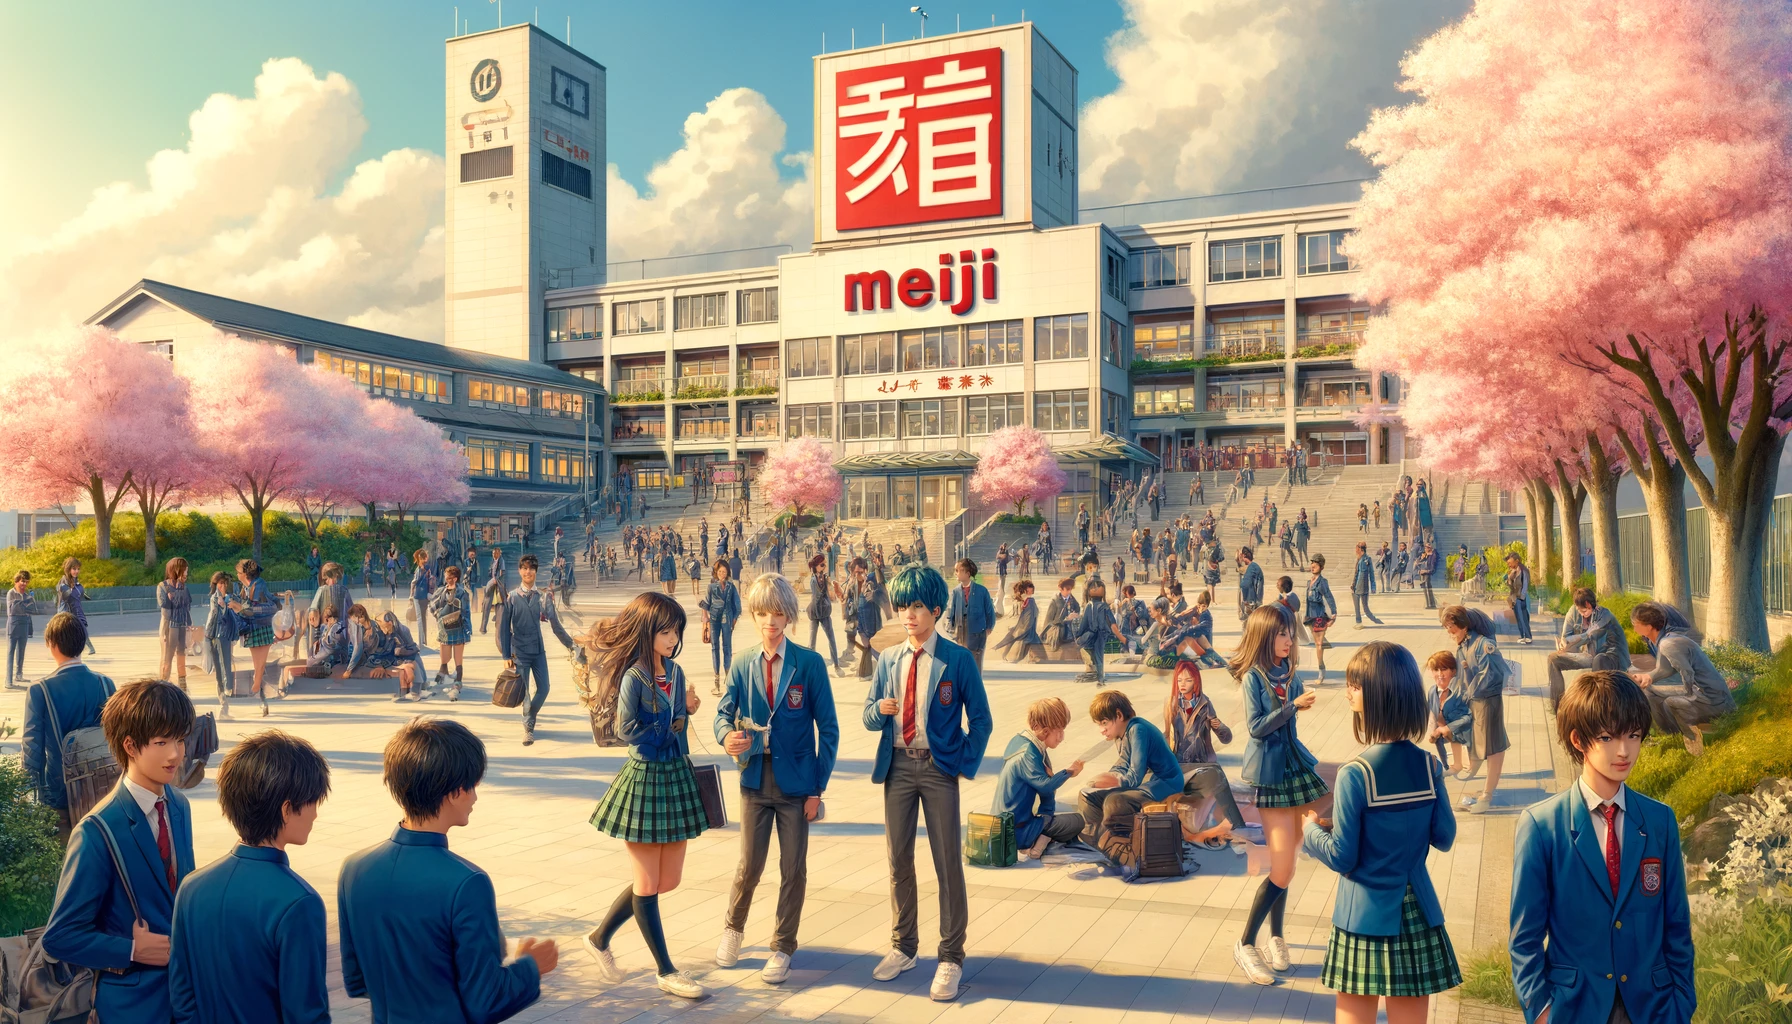 A lively high school campus scene illustrating the popularity of Meiji High School in Japan, with the word 'Meiji' prominently displayed in both Japanese and English in the sky. The image features a diverse group of students of various Asian descents, in school uniforms, engaged in various activities. Students are seen chatting, studying, and participating in sports on a well-maintained campus with modern and traditional architectural elements. There are cherry trees in bloom, adding a picturesque quality to the setting. The atmosphere is vibrant and energetic, capturing the essence of a bustling and popular educational institution.